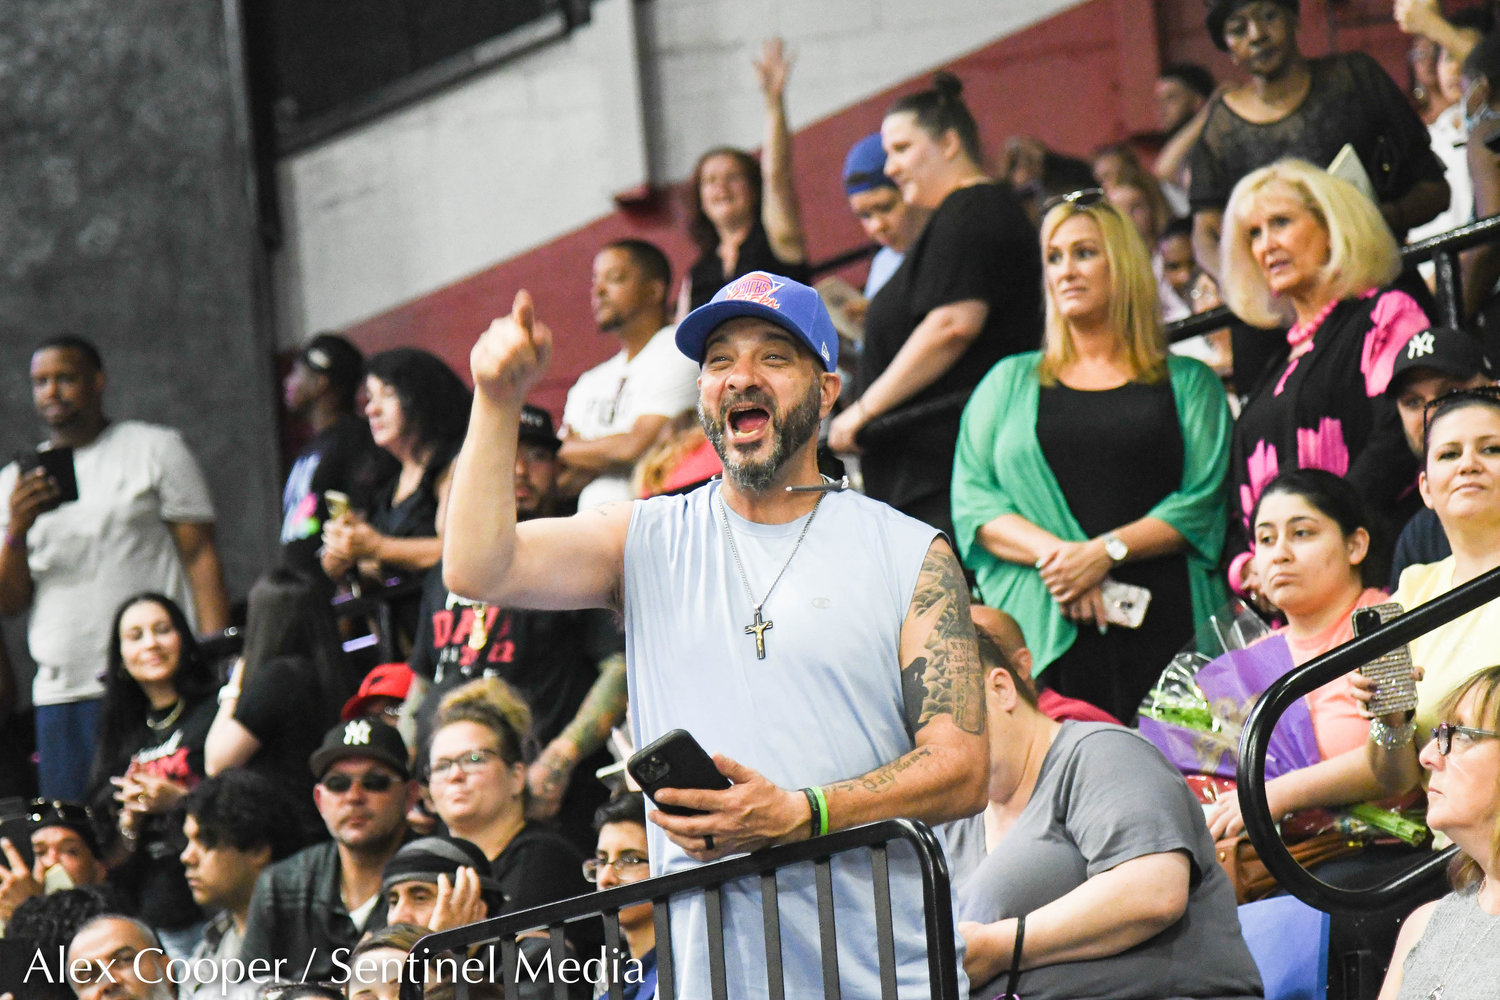 A man from the crowd yells in excitement during the annual commencement ceremony for Thomas R. Proctor High School graduates took place on Friday at the Adirondack Bank Center at the Utica Memorial Auditorium.